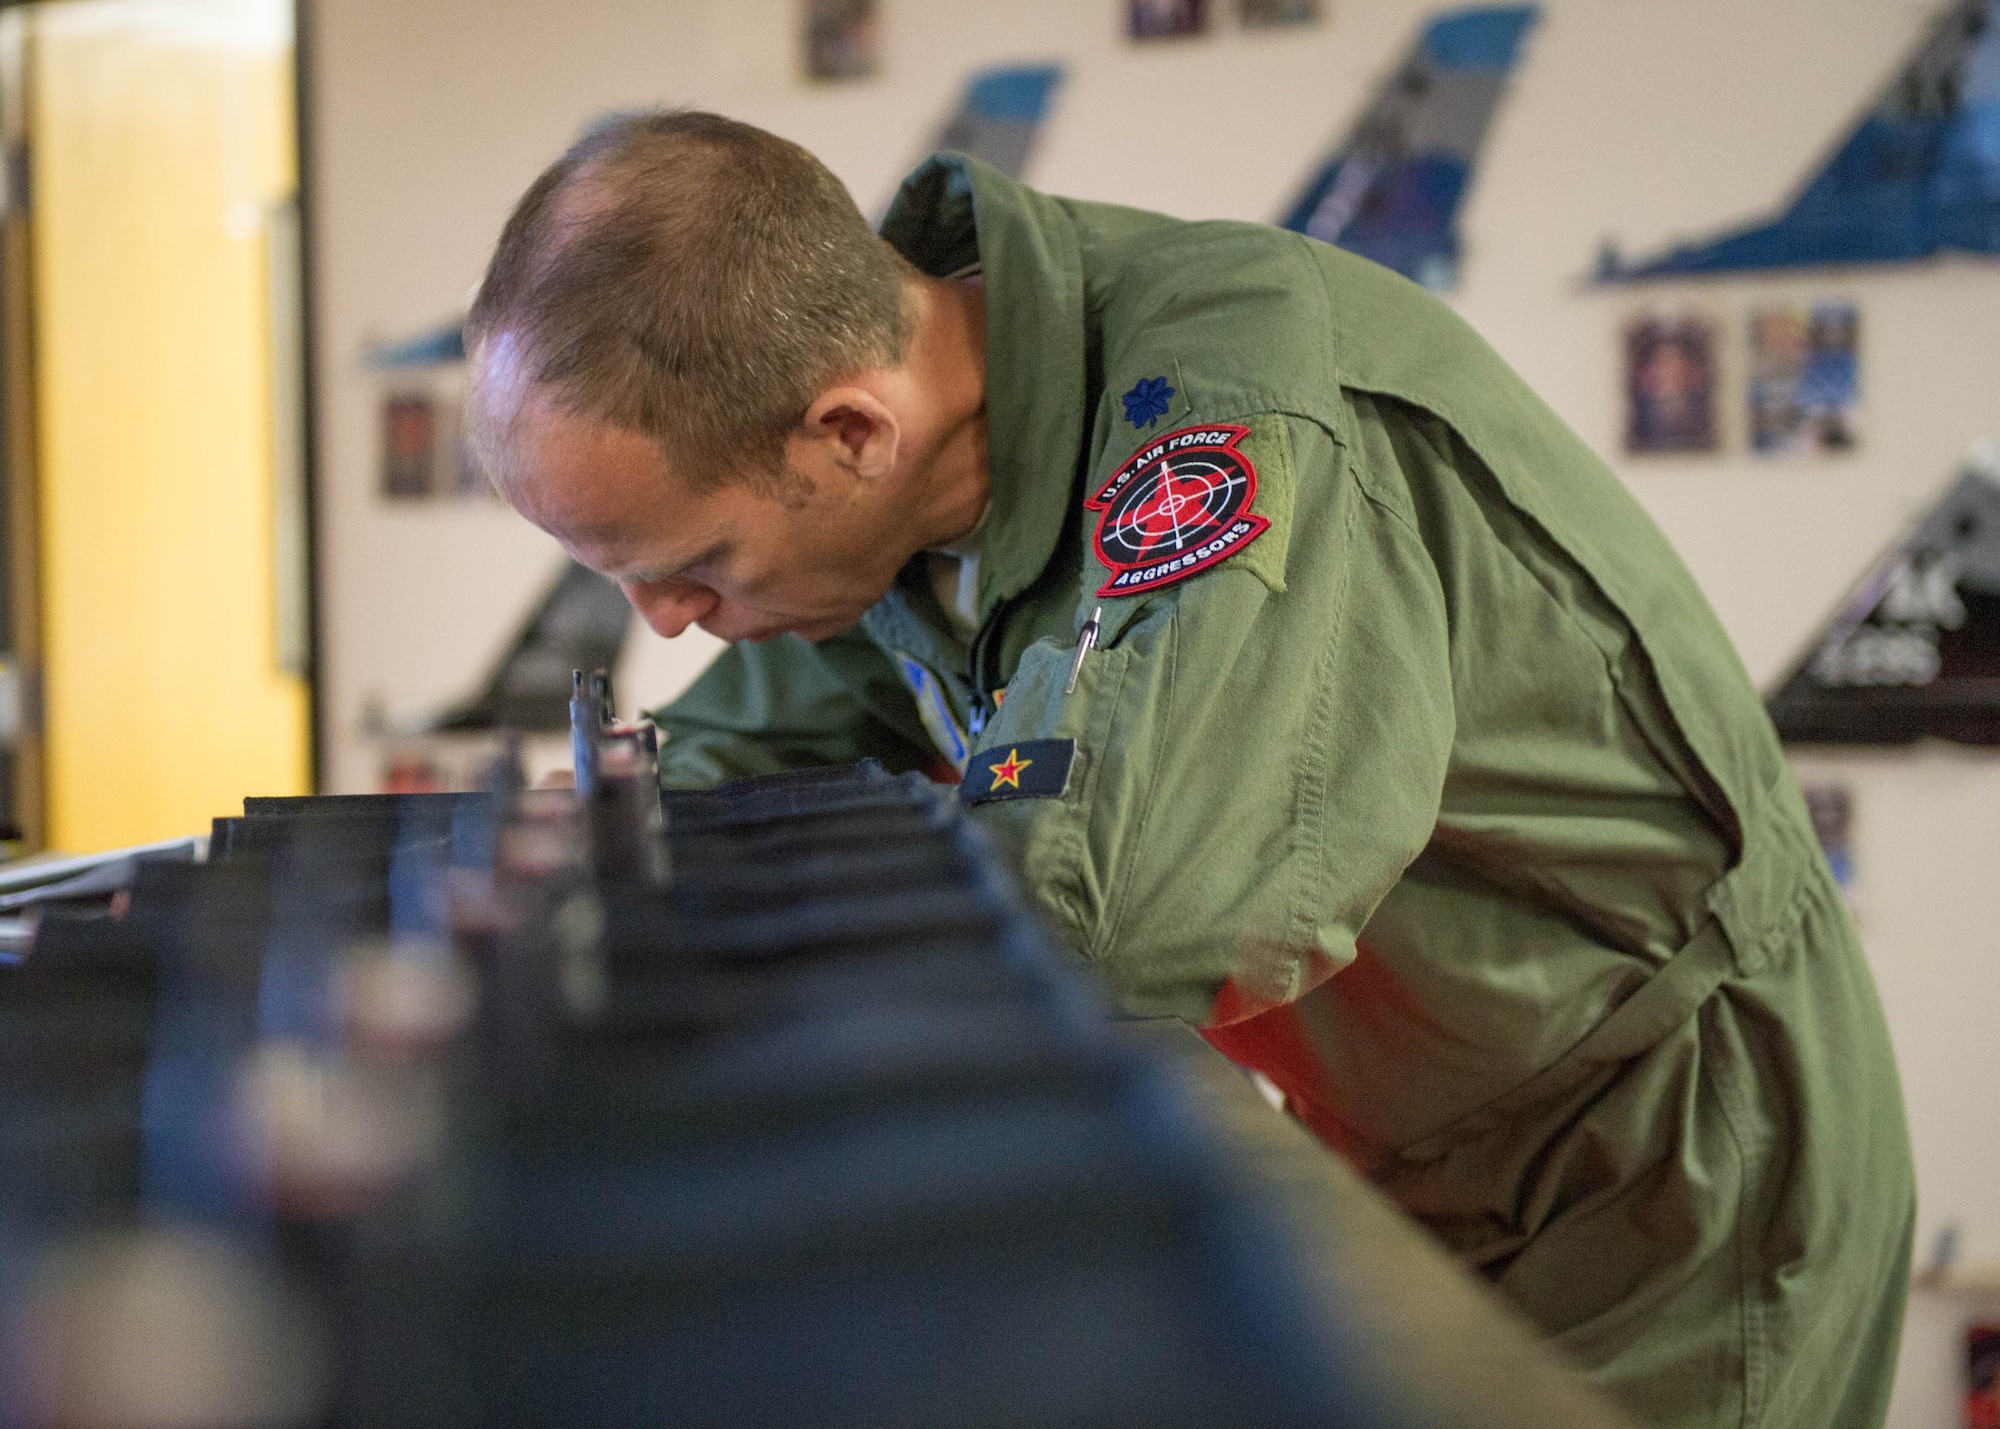 U.S. Air Force Lt. Col. Micah Bell, the 354th Operations Support Squadron commander, fills out flight paperwork at the 18th Aggressor Squadron operations desk prior to a a sortie June 14, 2016, during RED FLAG-Alaska (RF-A) 16-2 at Eielson Air Force Base, Alaska. Pilots from Eielson take on the role of Red Air “bad guys” during large scale exercises and train Blue Air pilots during RF-A. (U.S. Air Force photo by Staff Sgt. Shawn Nickel/Released)
